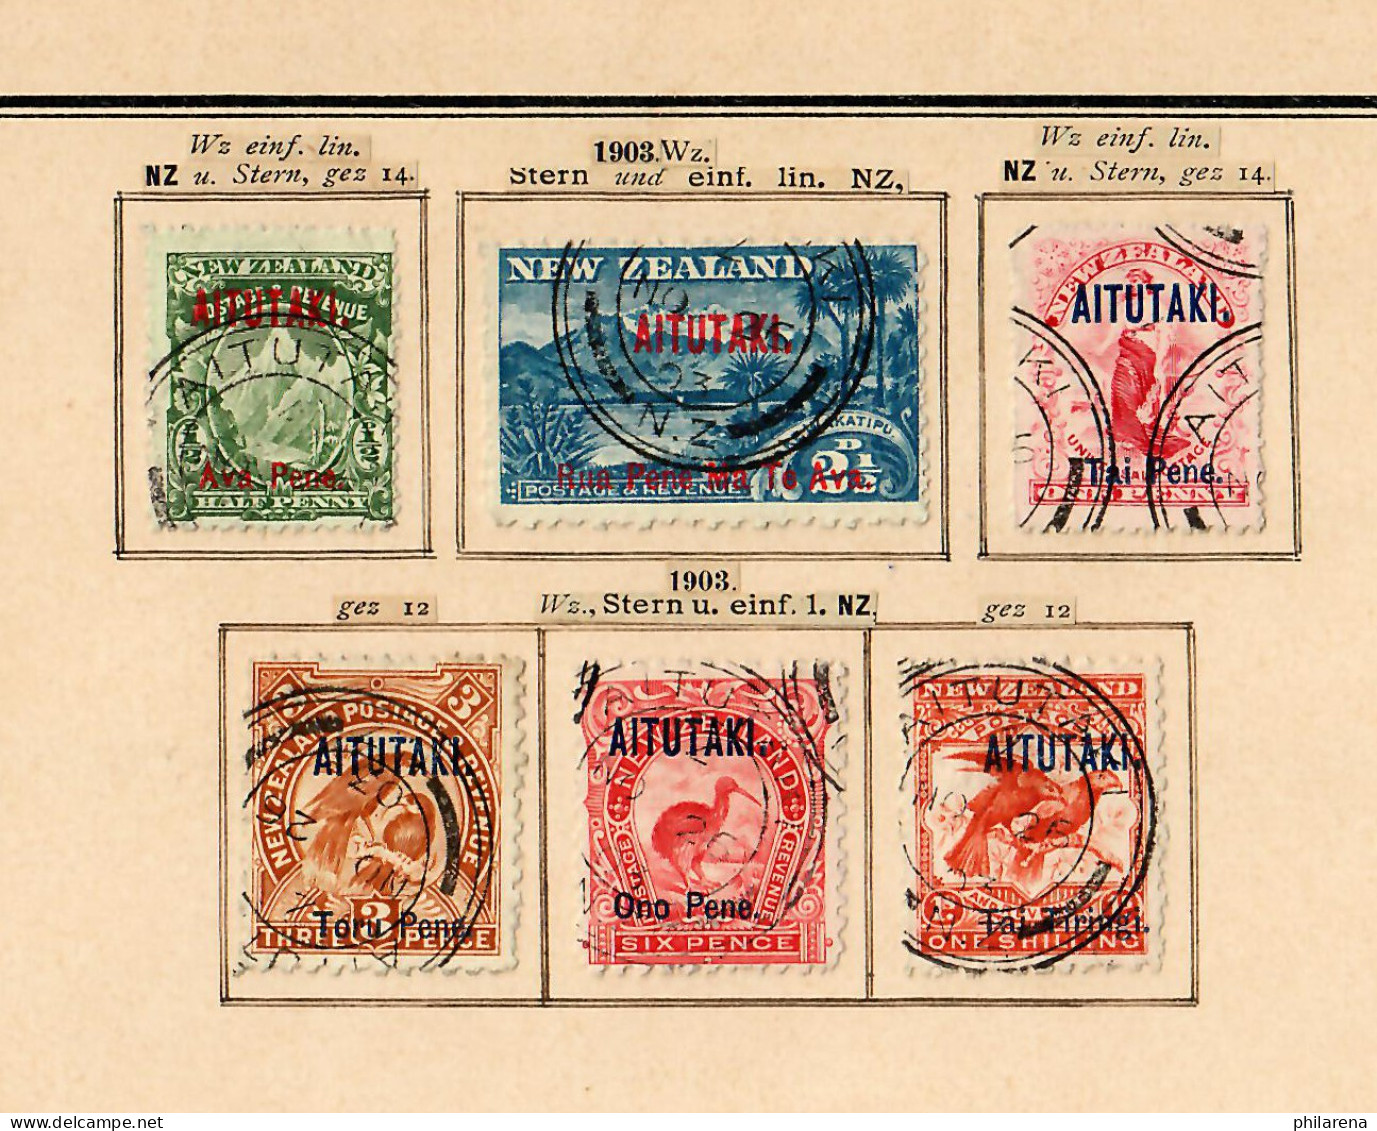 Aitutaki: First Stamps 1-6 Complete Cancelled - Cook Islands